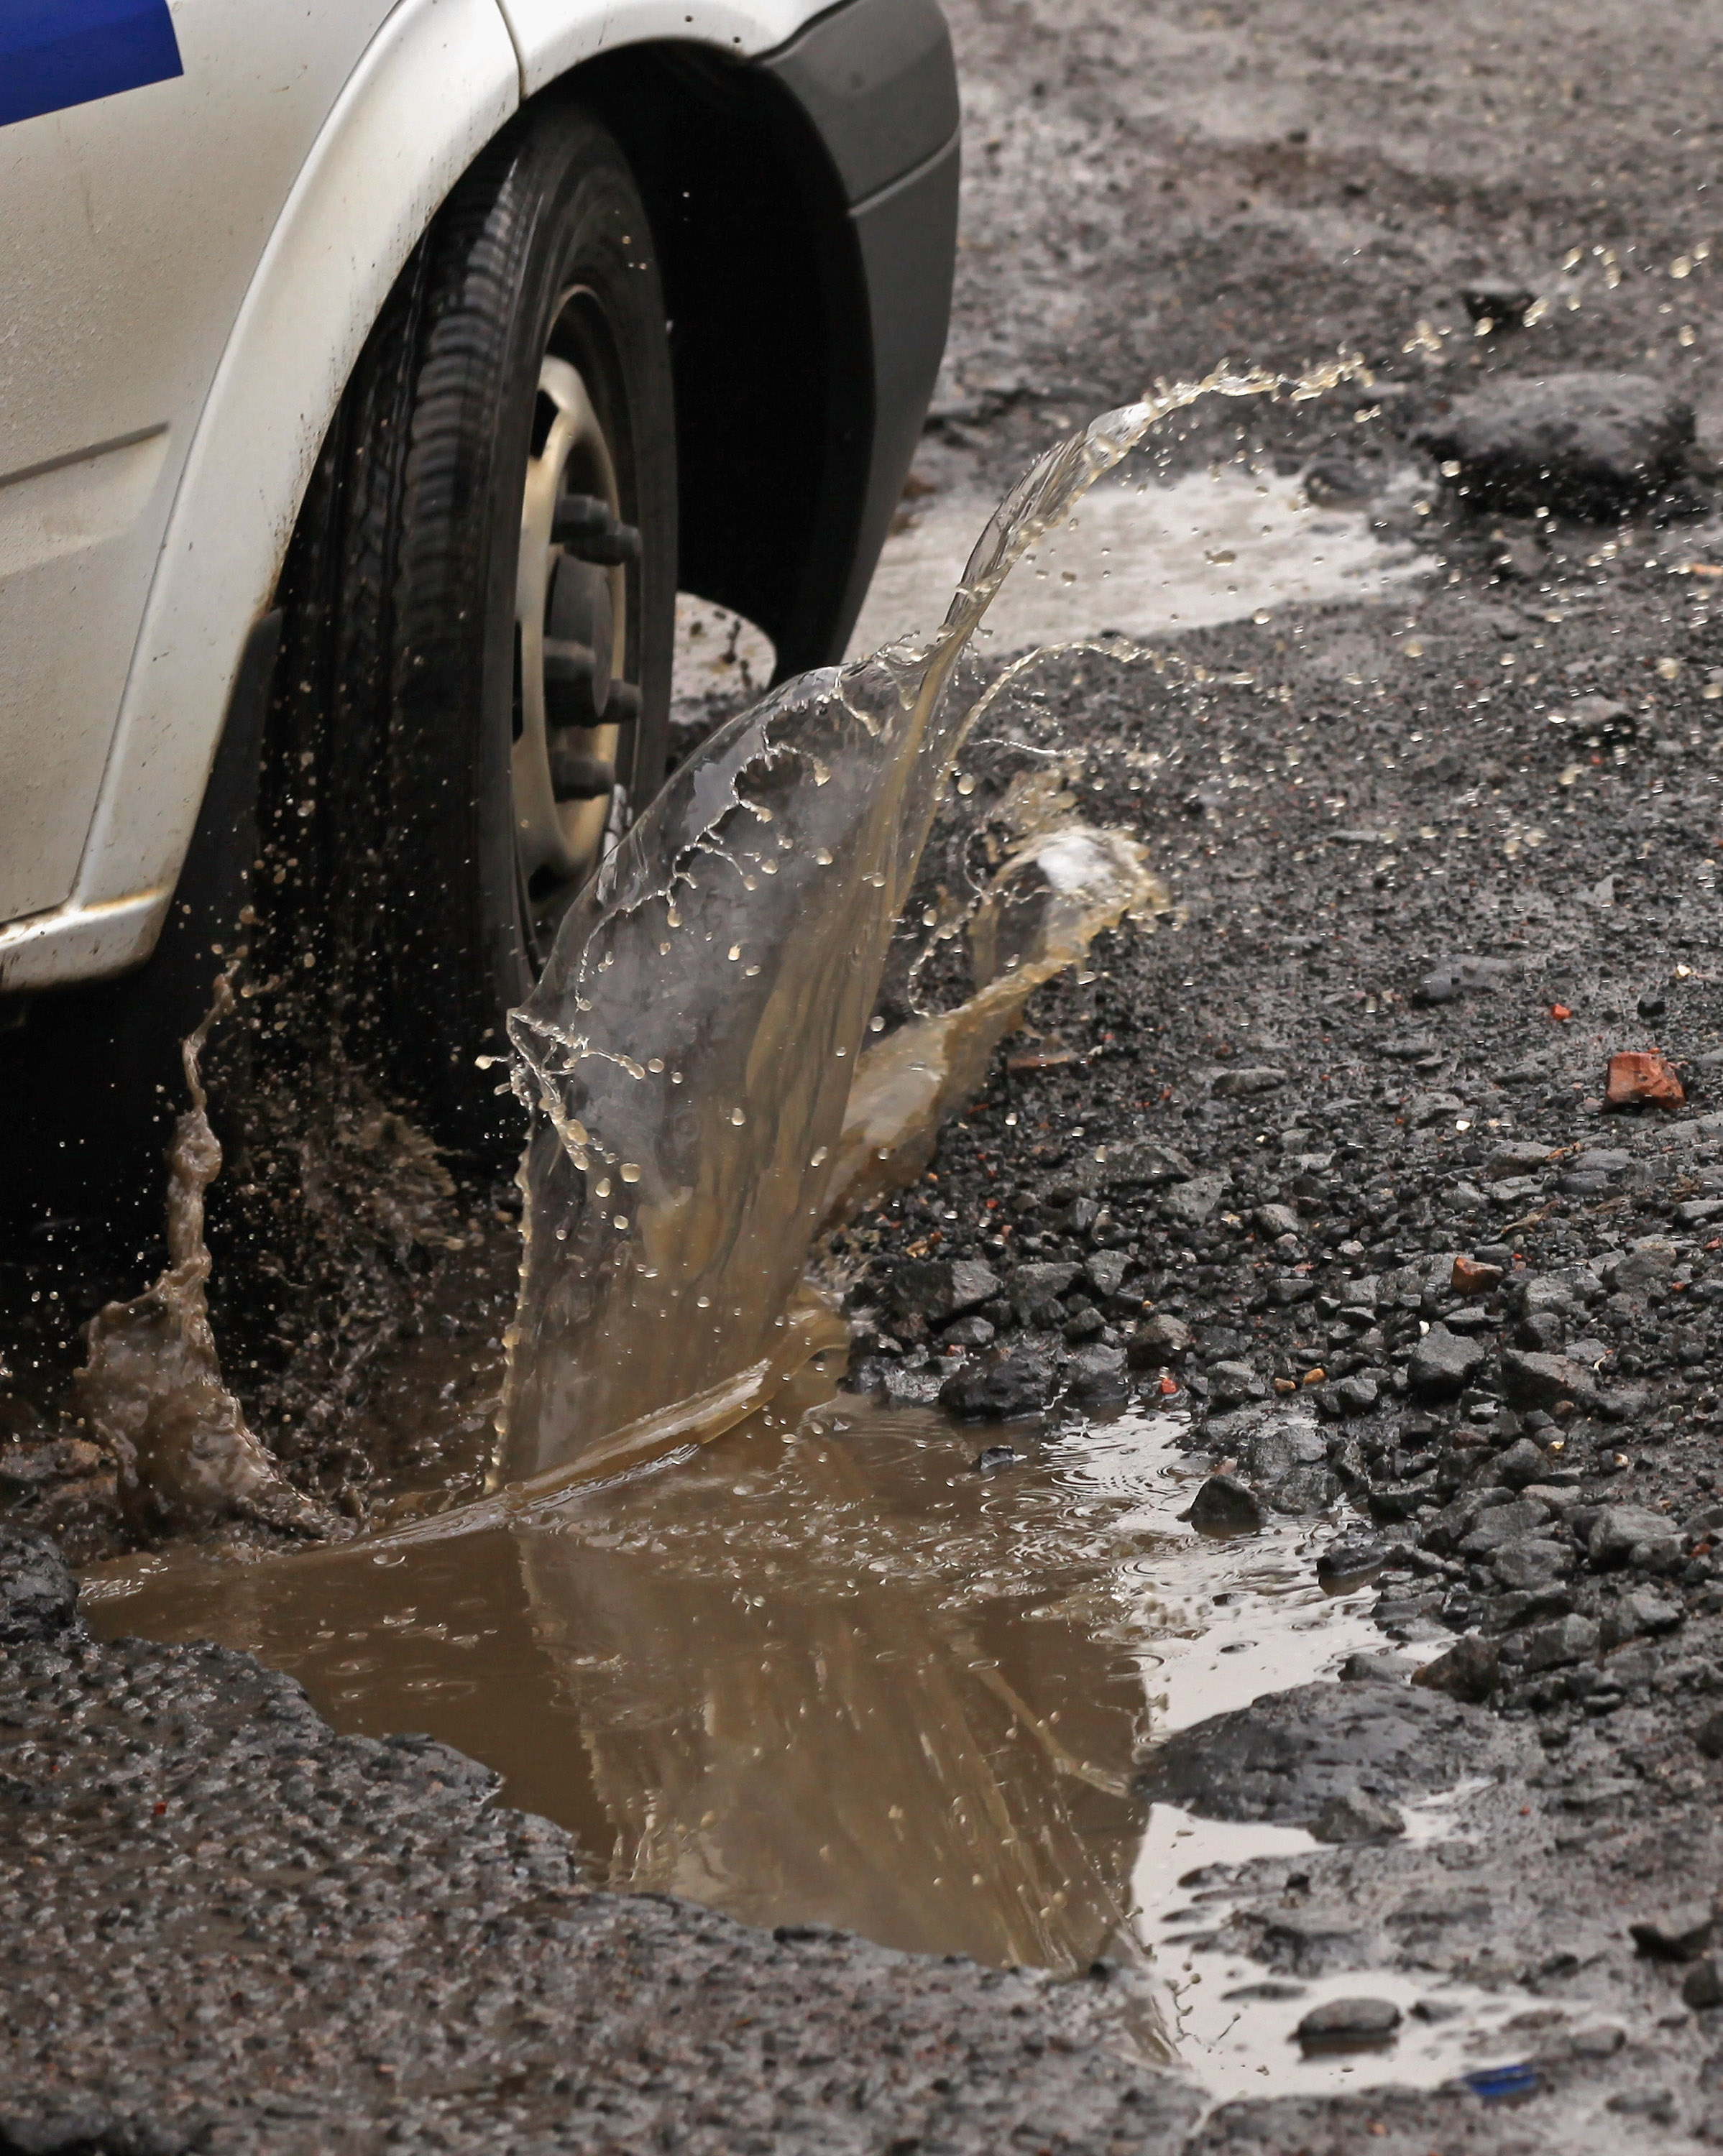 It's estimated for every 1,000 people in the city, there are at least 11 unrepaired potholes.